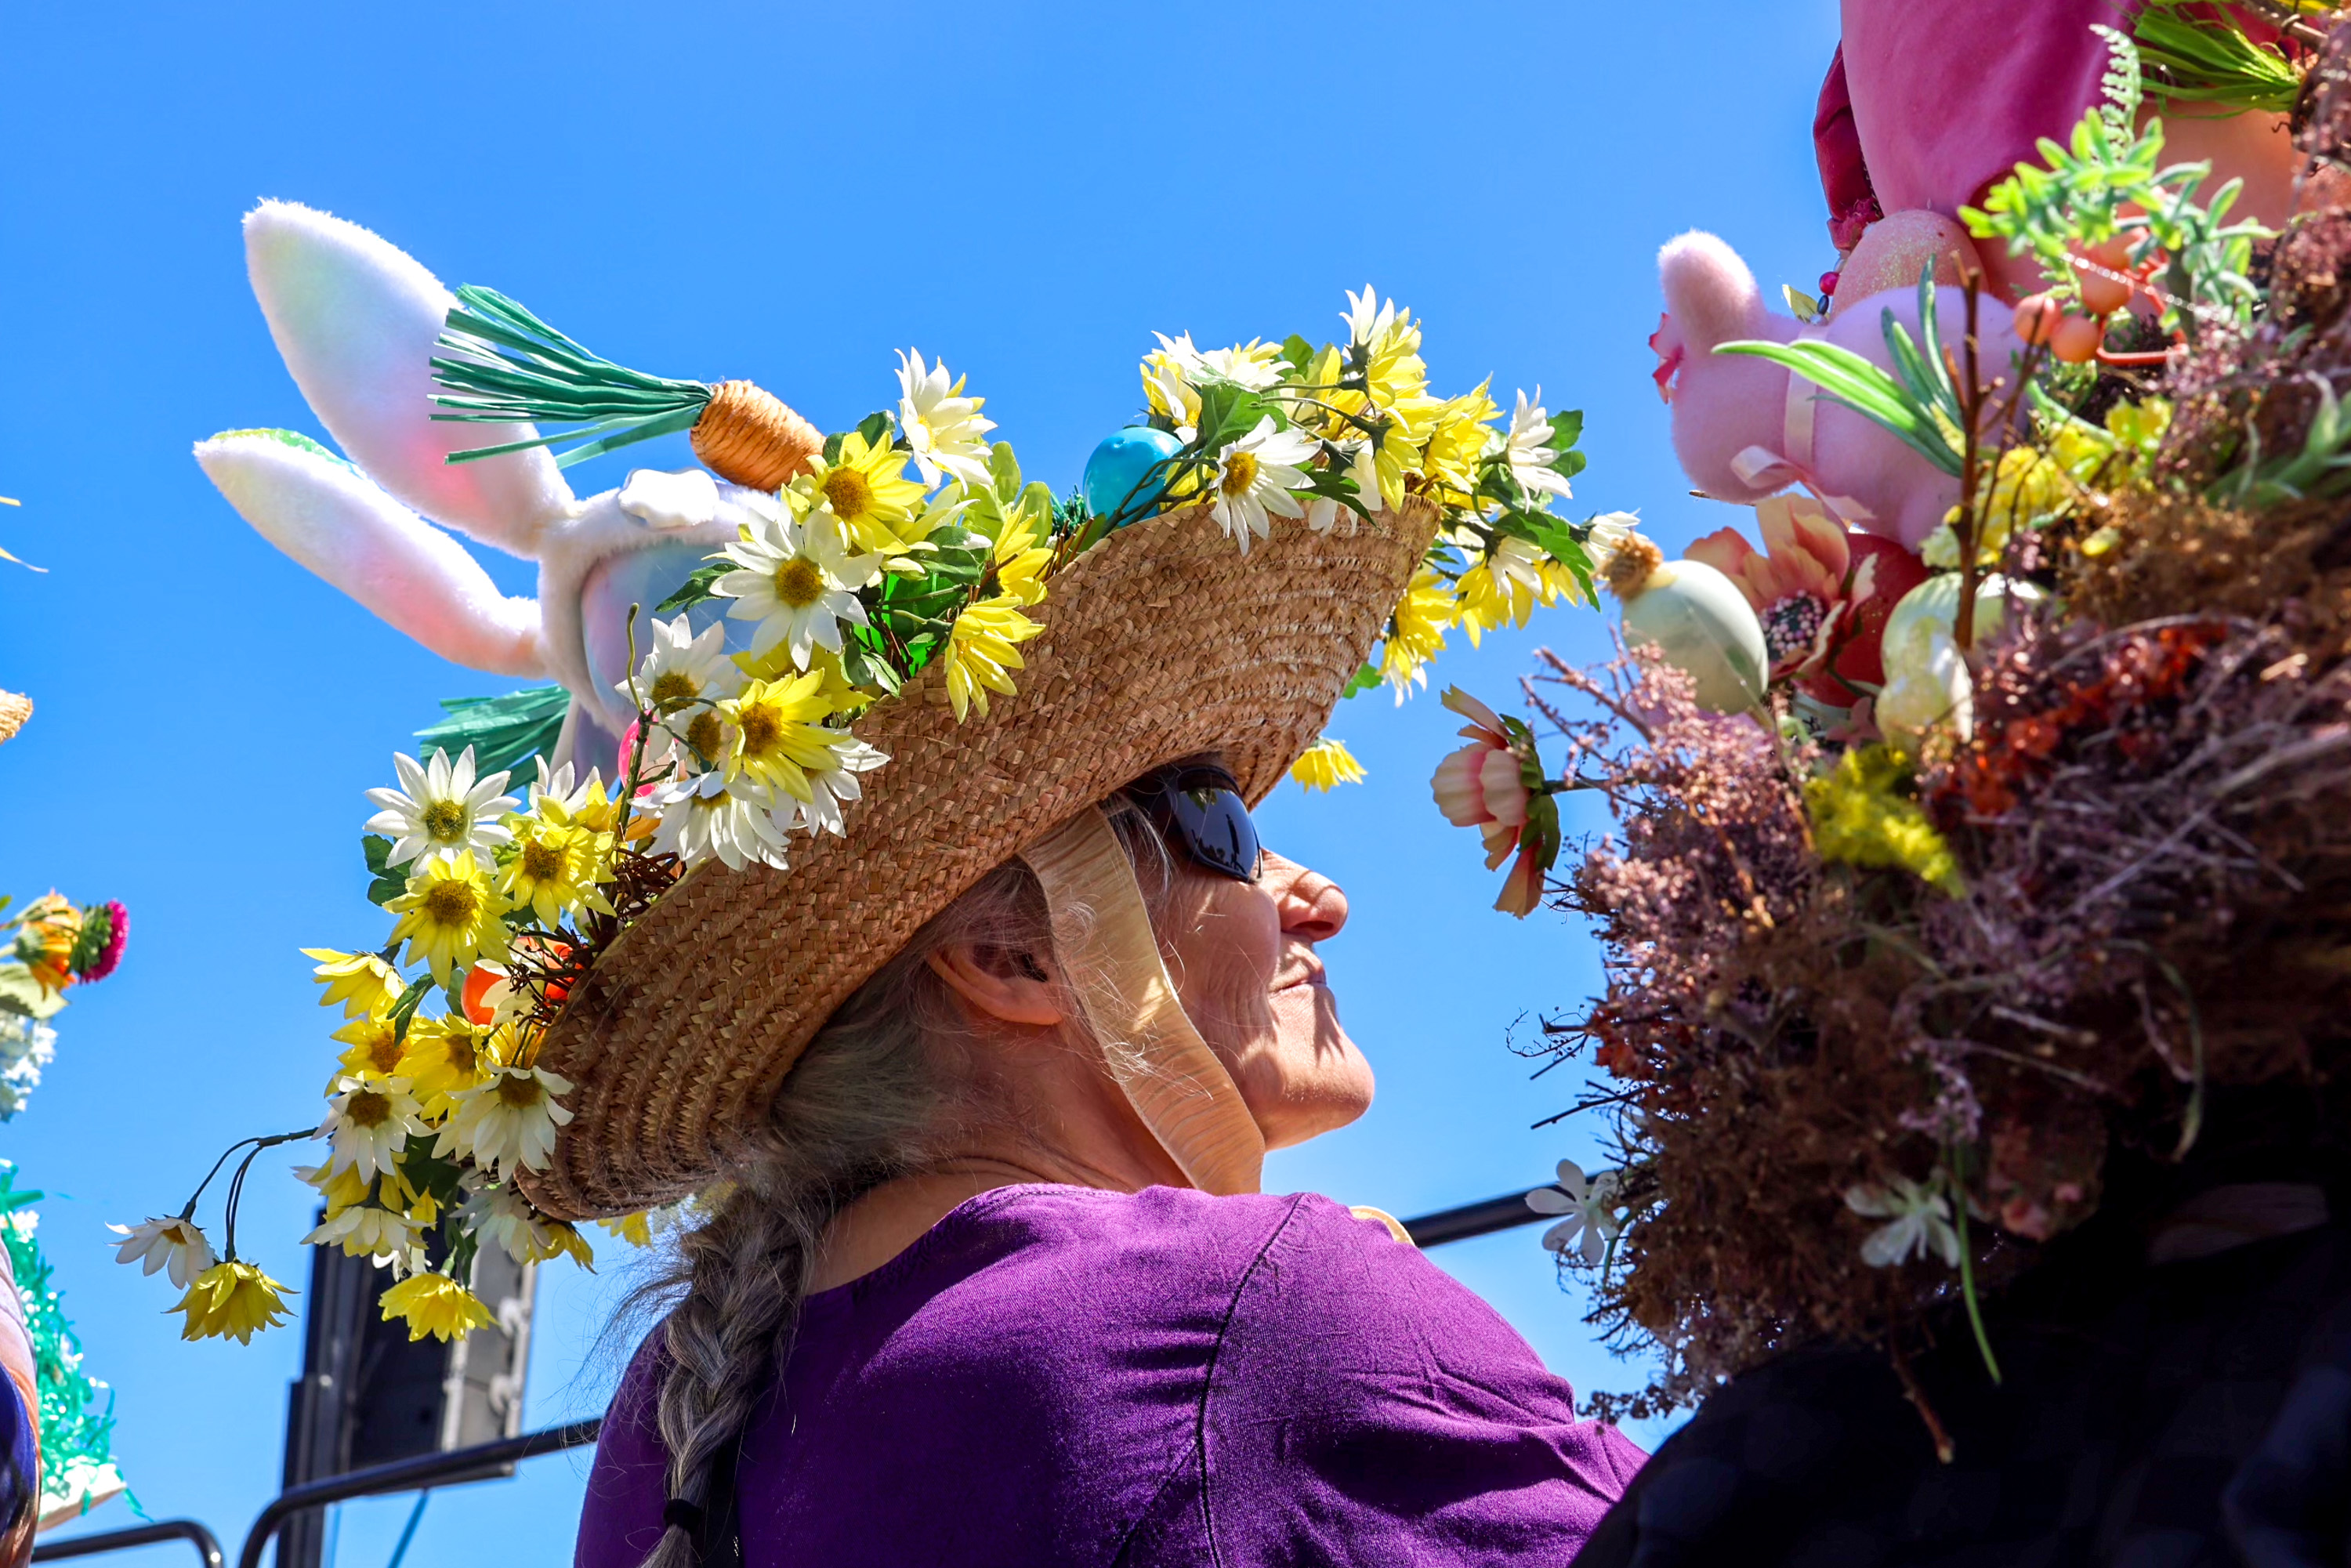 A person in a flower-adorned hat with bunny ears under a clear blue sky.